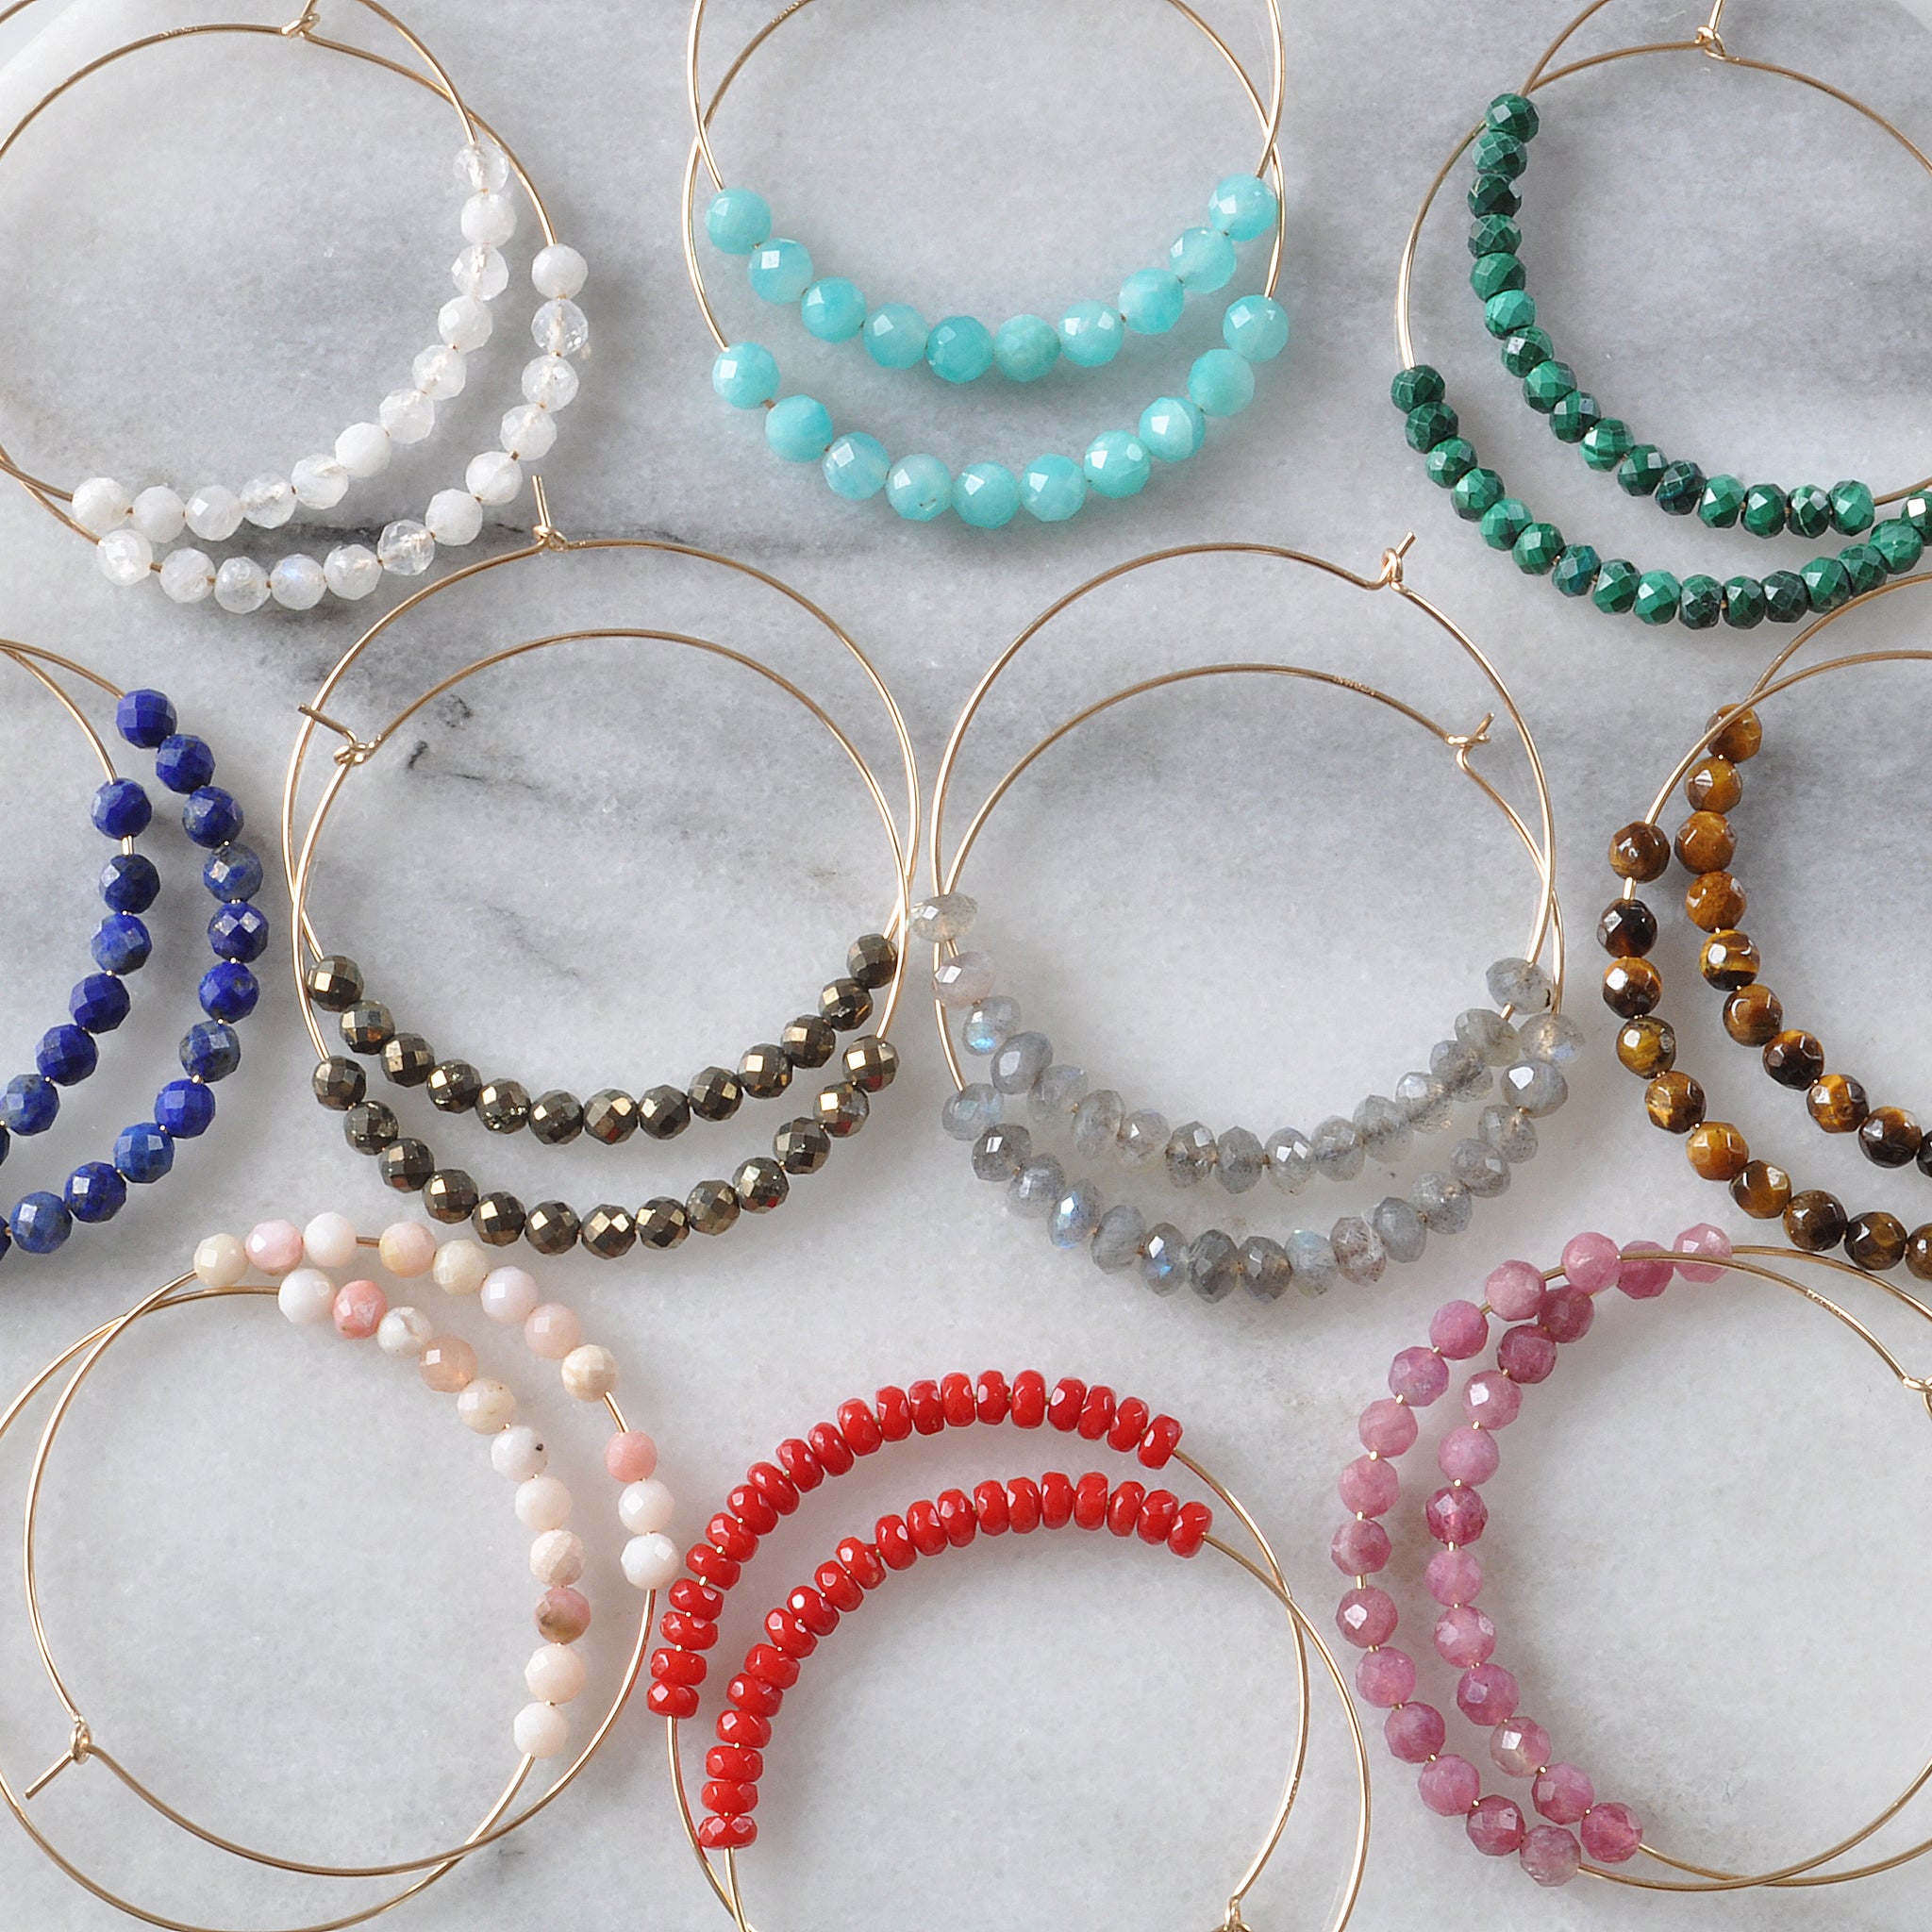 Get your Woo-Woo on with Gemstone Jewelry